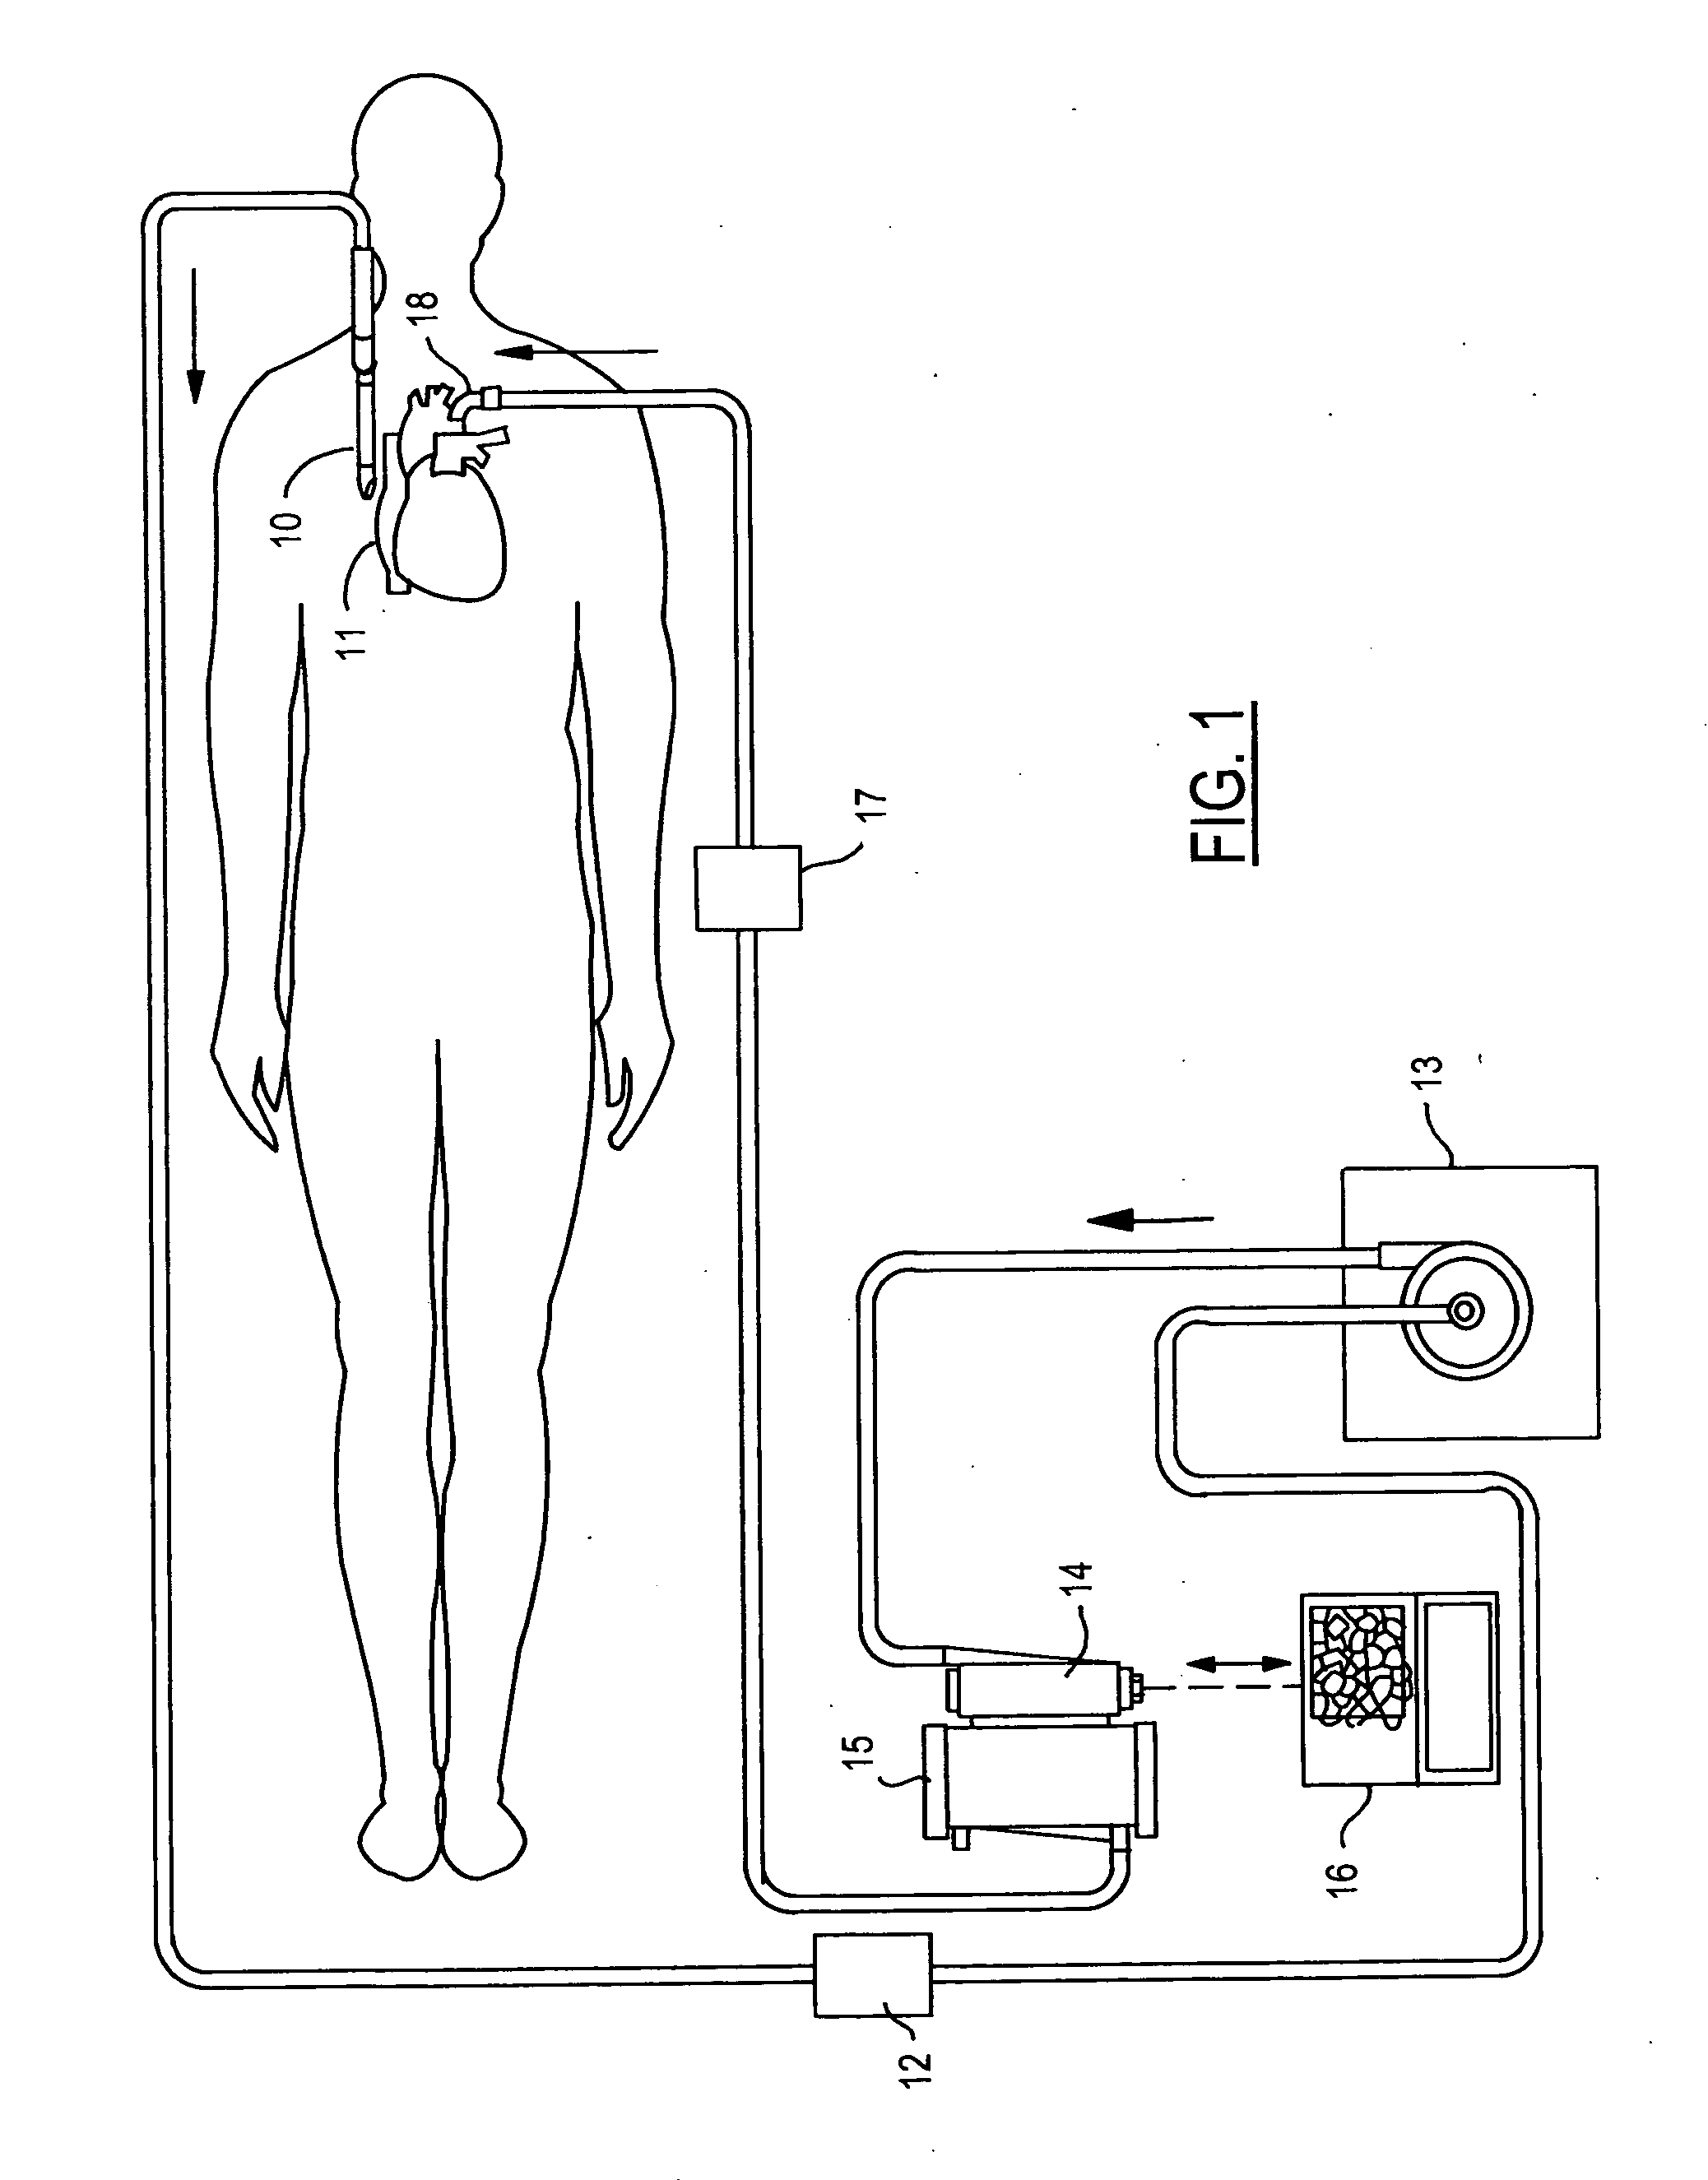 Air removal device with float valve for blood perfusion system